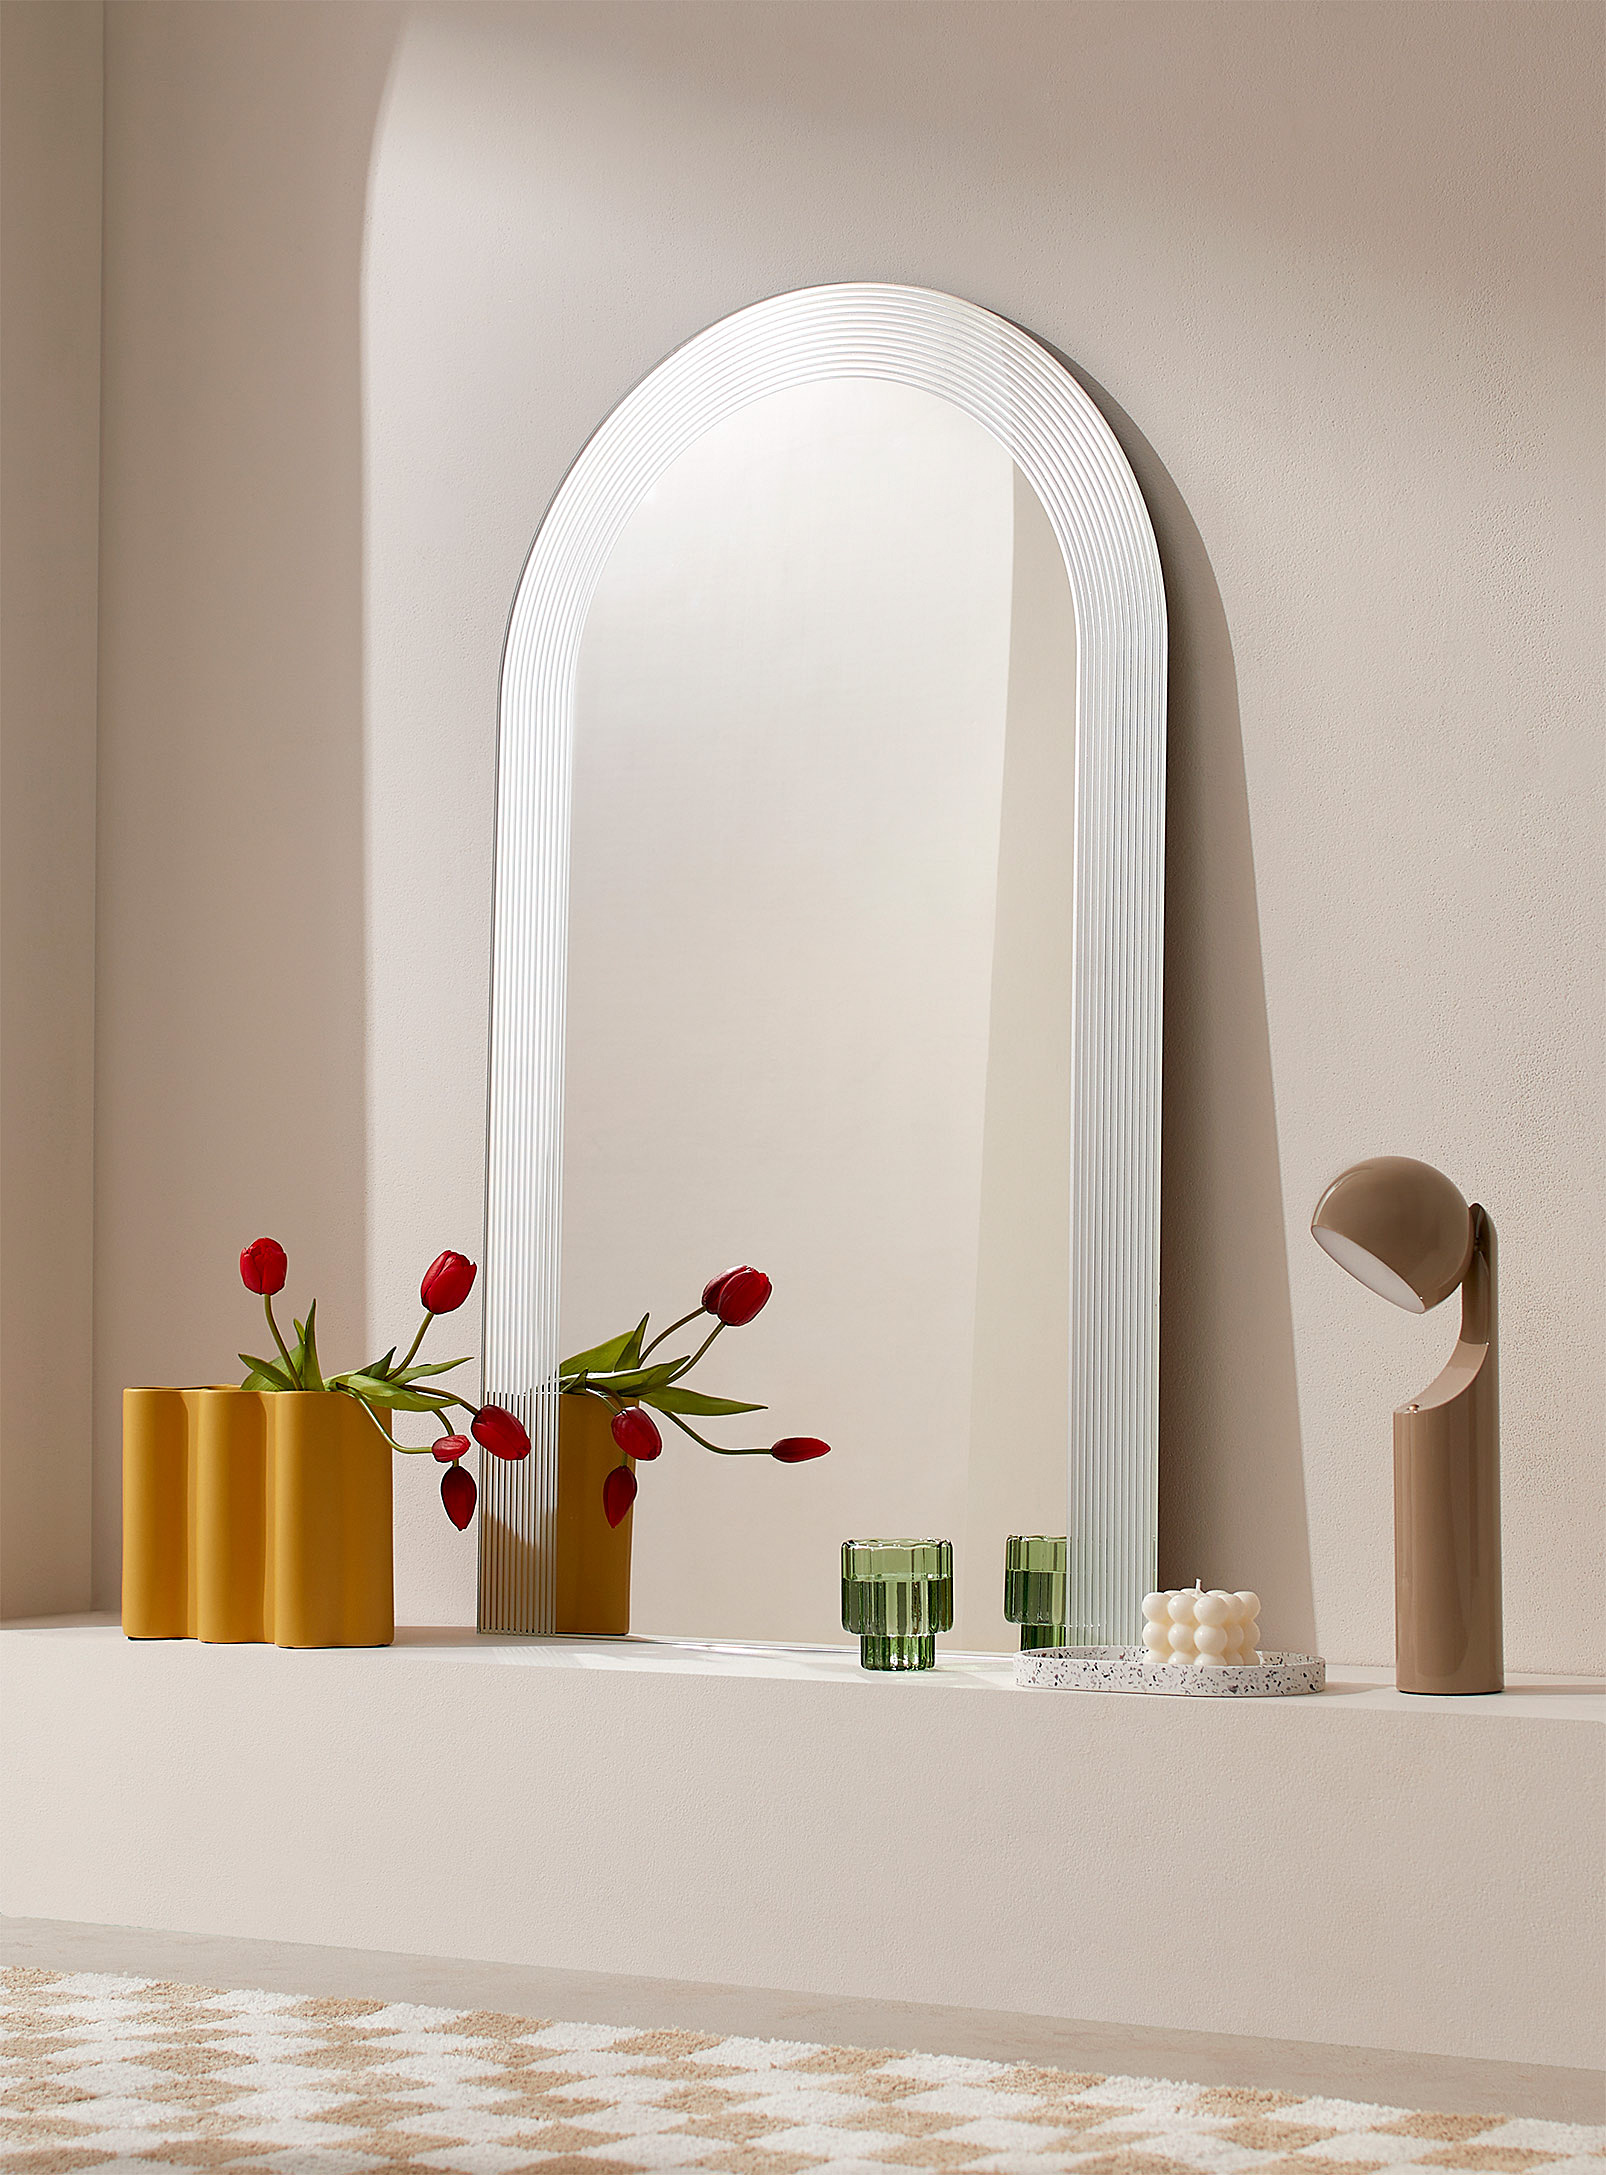 Simons Maison - Grooved arch mirror